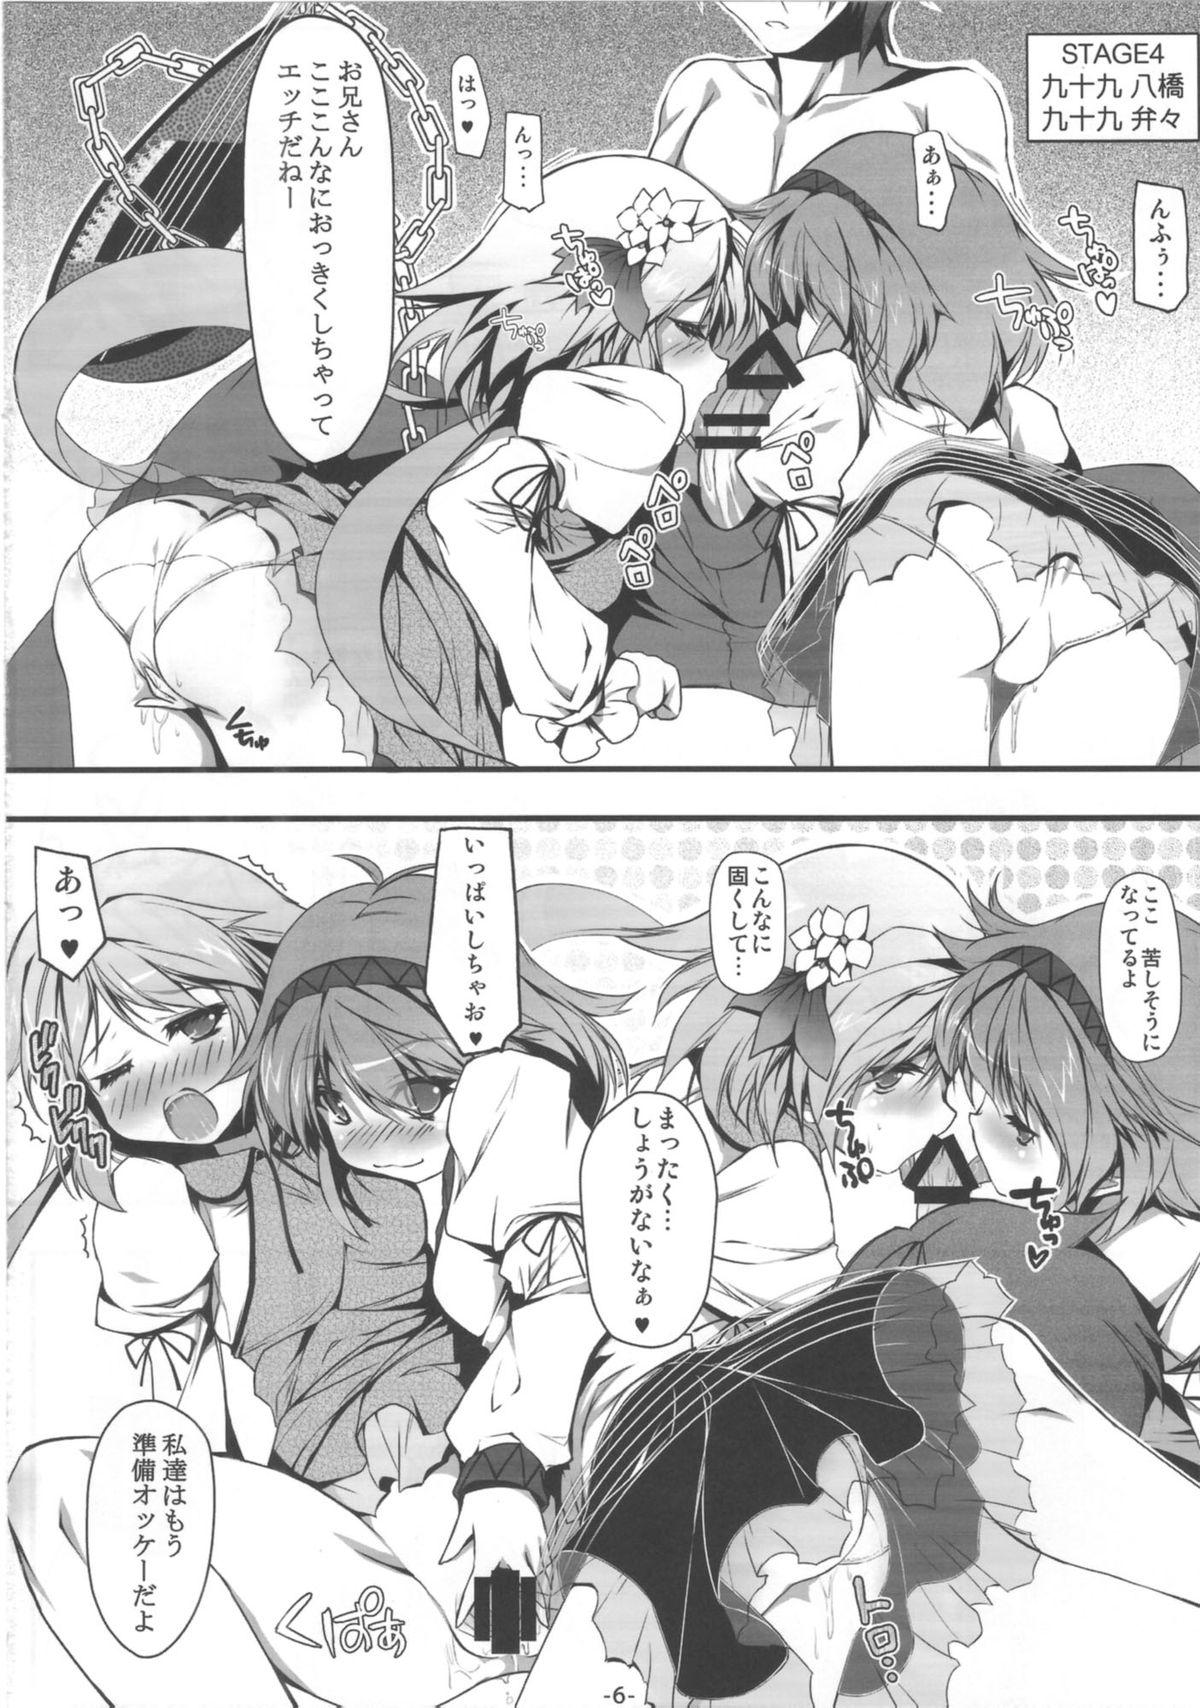 Best Blowjob Ookikuna ~ Re!? - Touhou project Cuckolding - Page 7